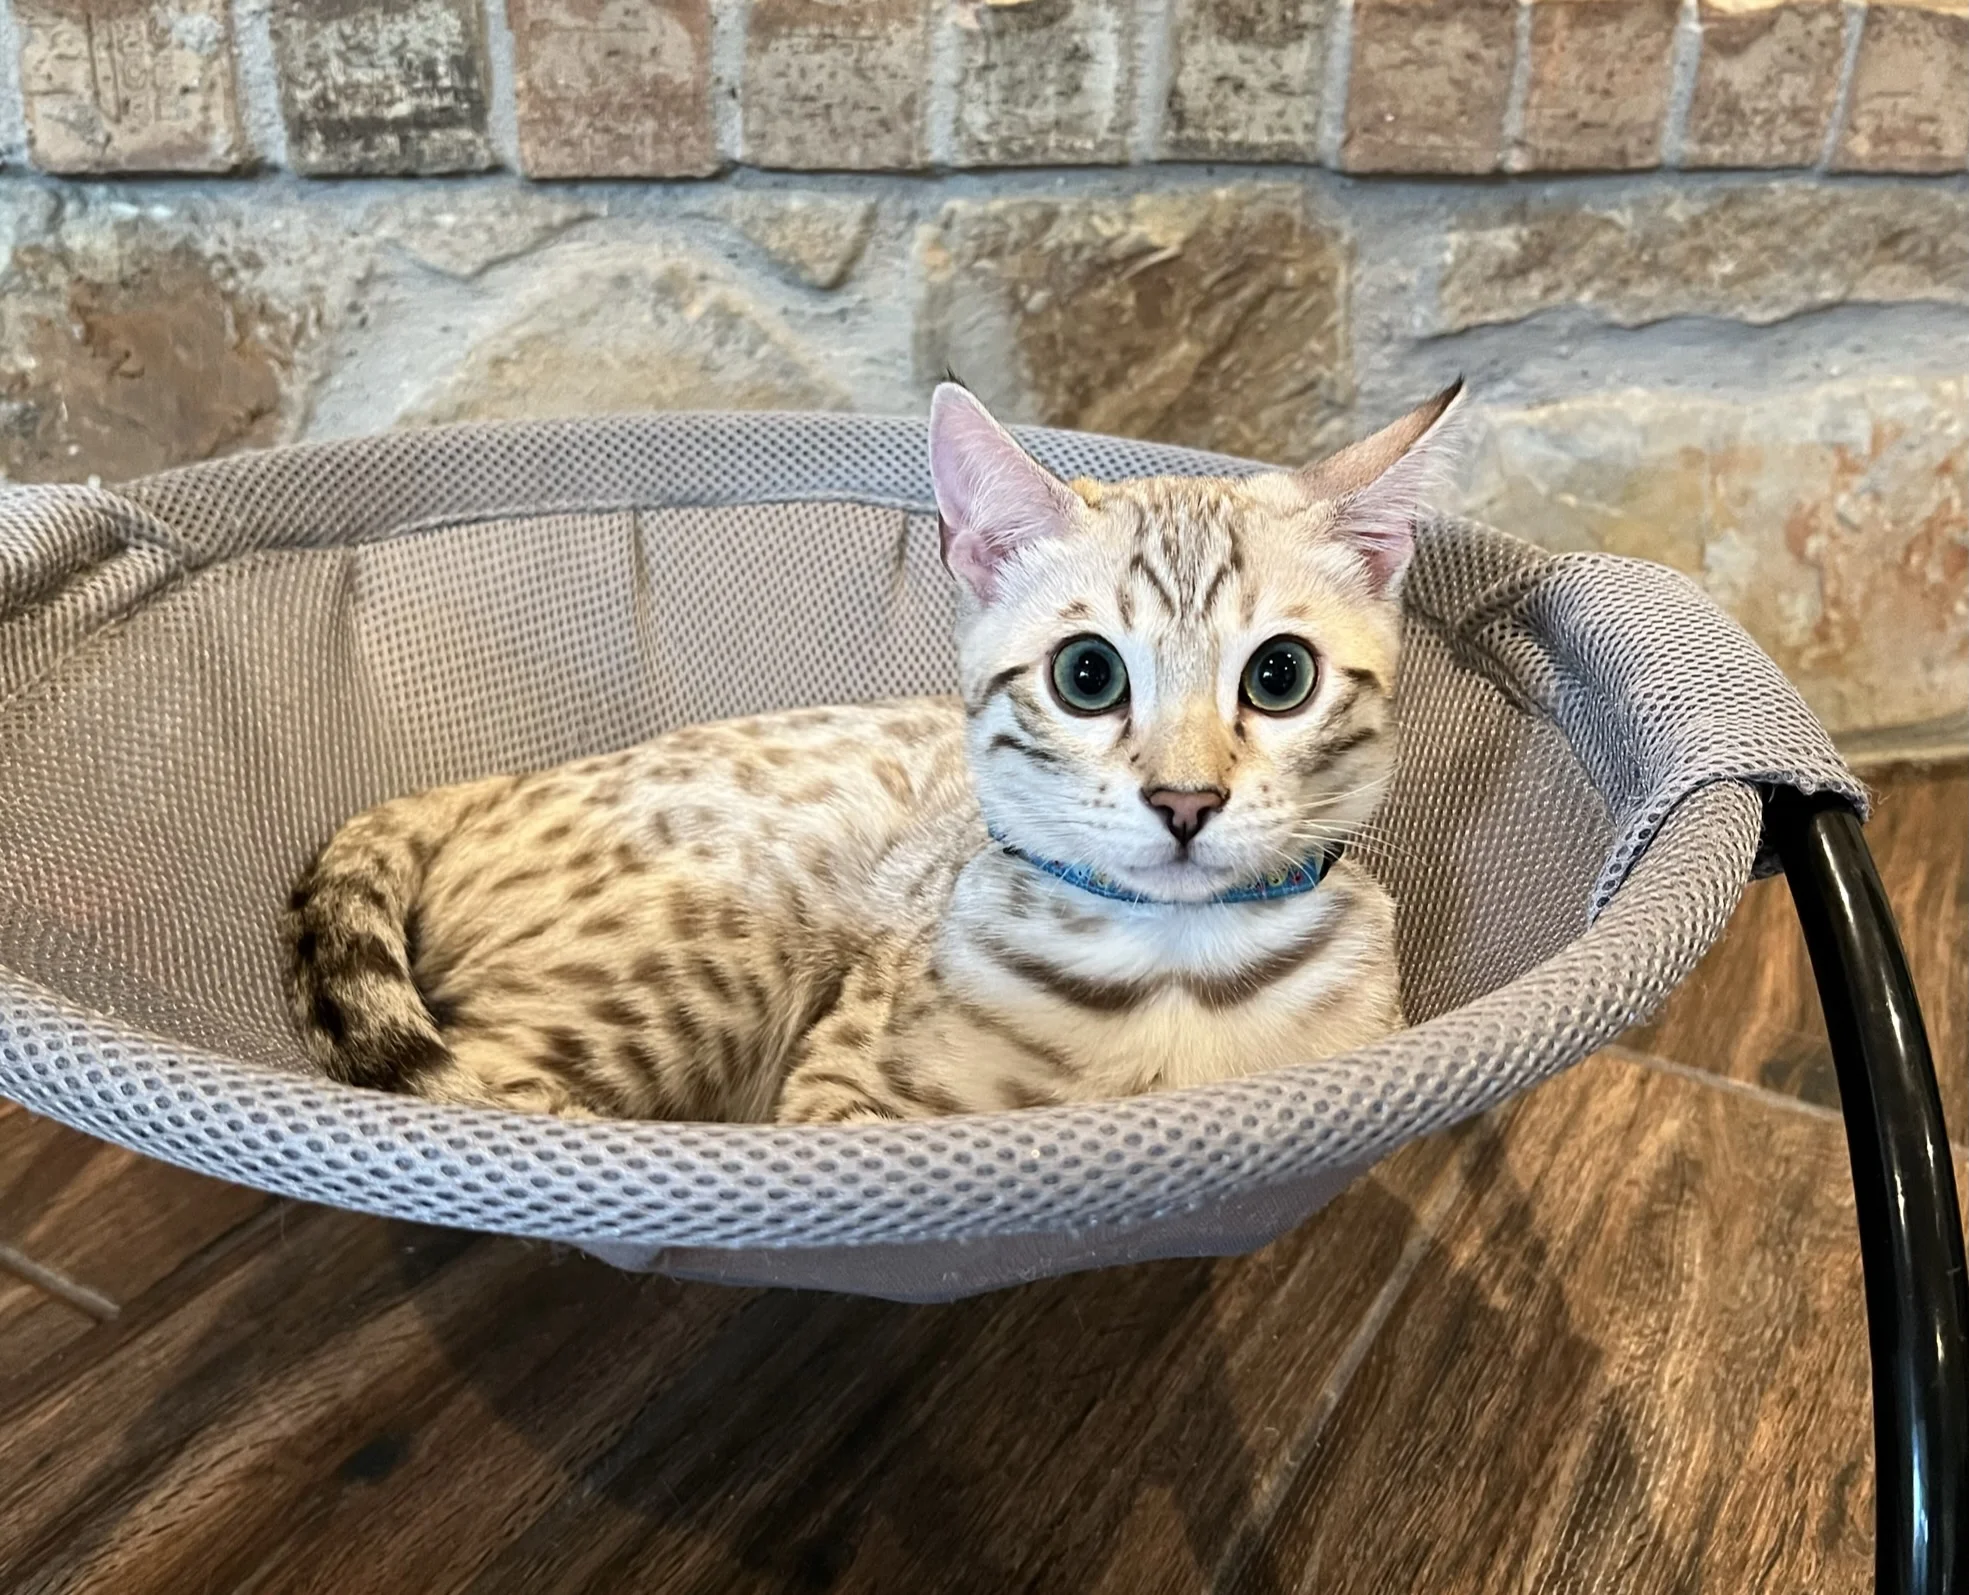 A Bengal cat from Lone Star Bengal Cats peacefully rests in a cozy cat bed.